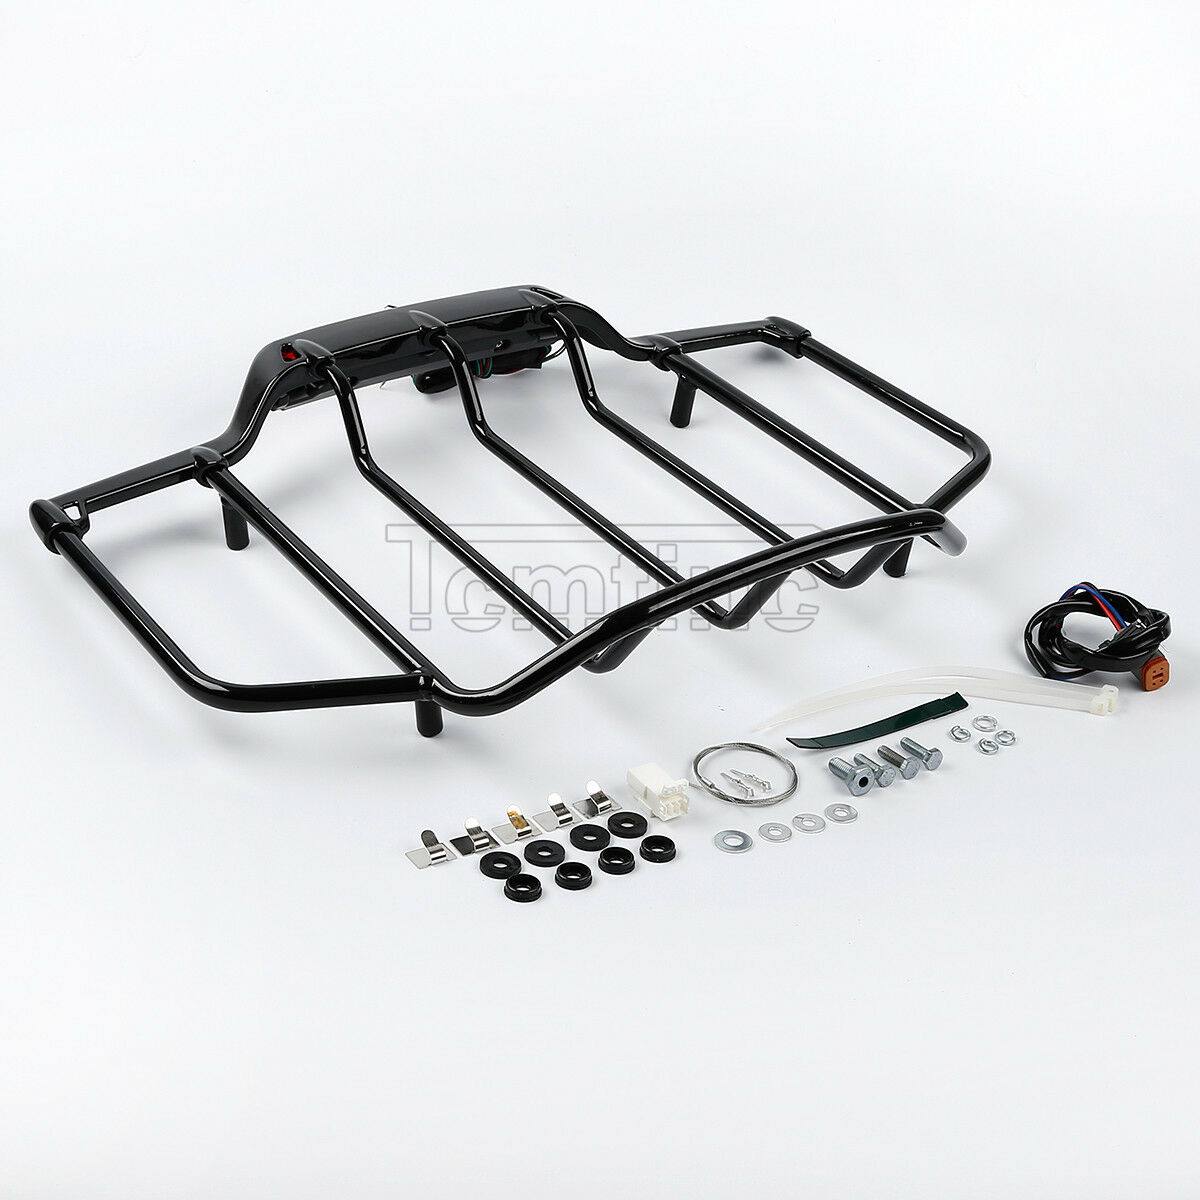 Trunk Luggage Rack w/ LED Light For Harley Electra Road Glide Tour Pak Air Wing - Moto Life Products